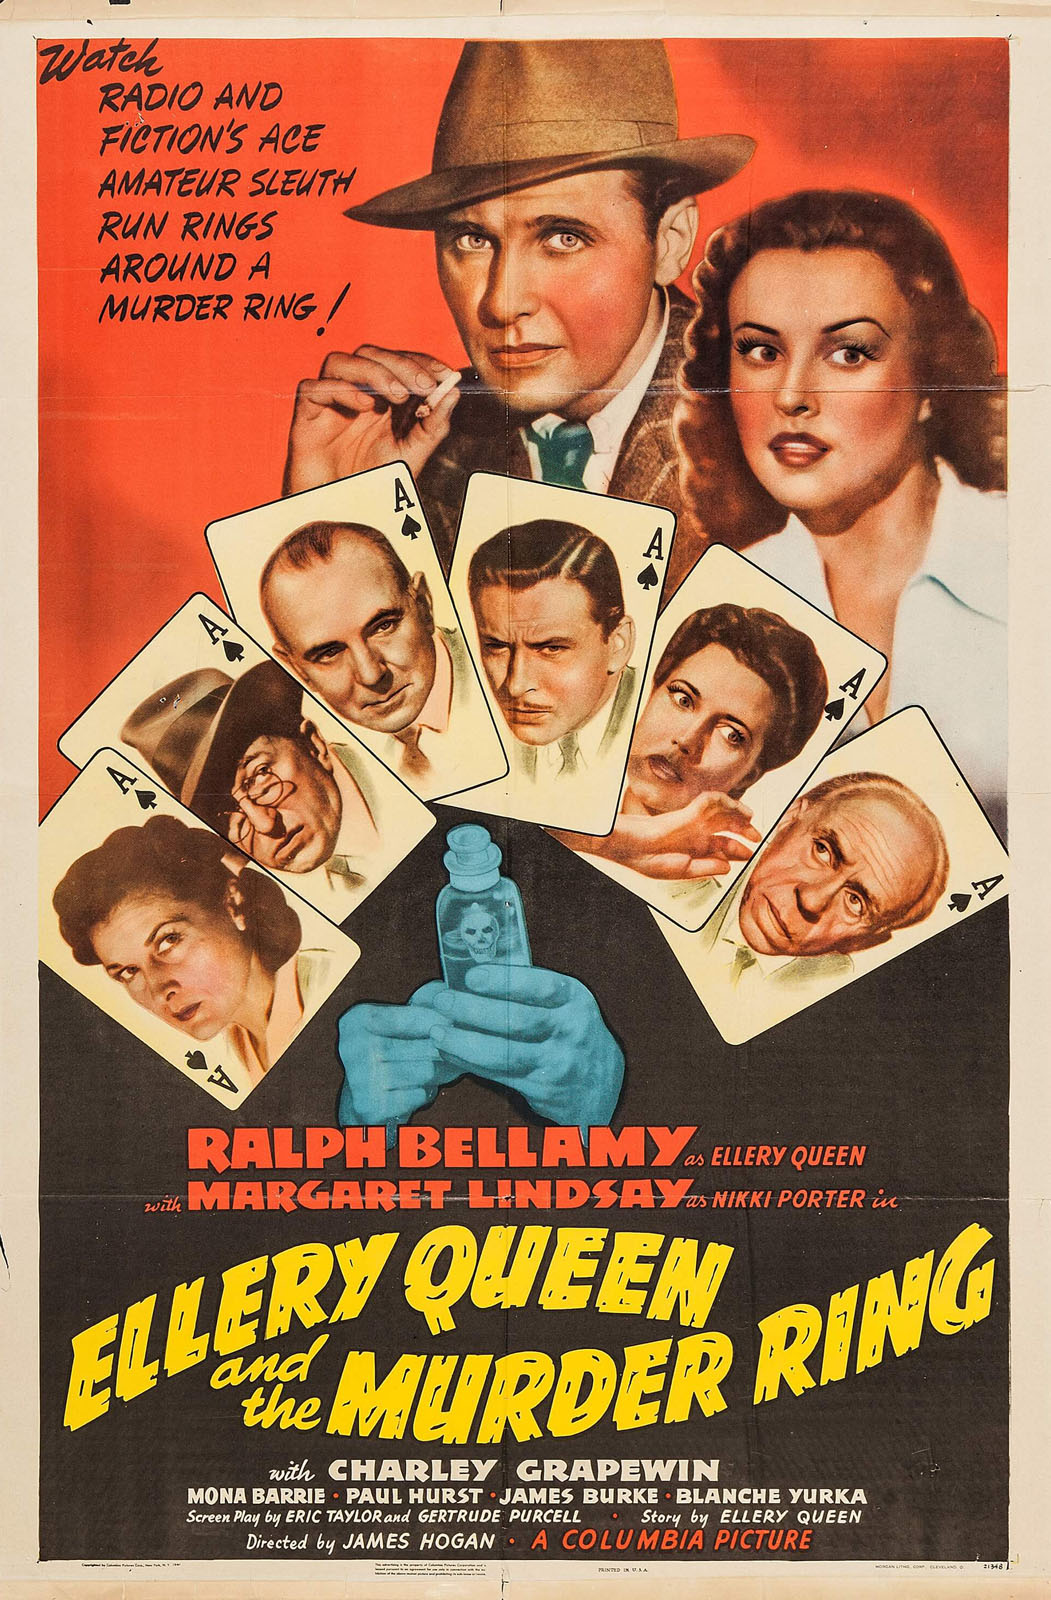 ELLERY QUEEN AND THE MURDER RING